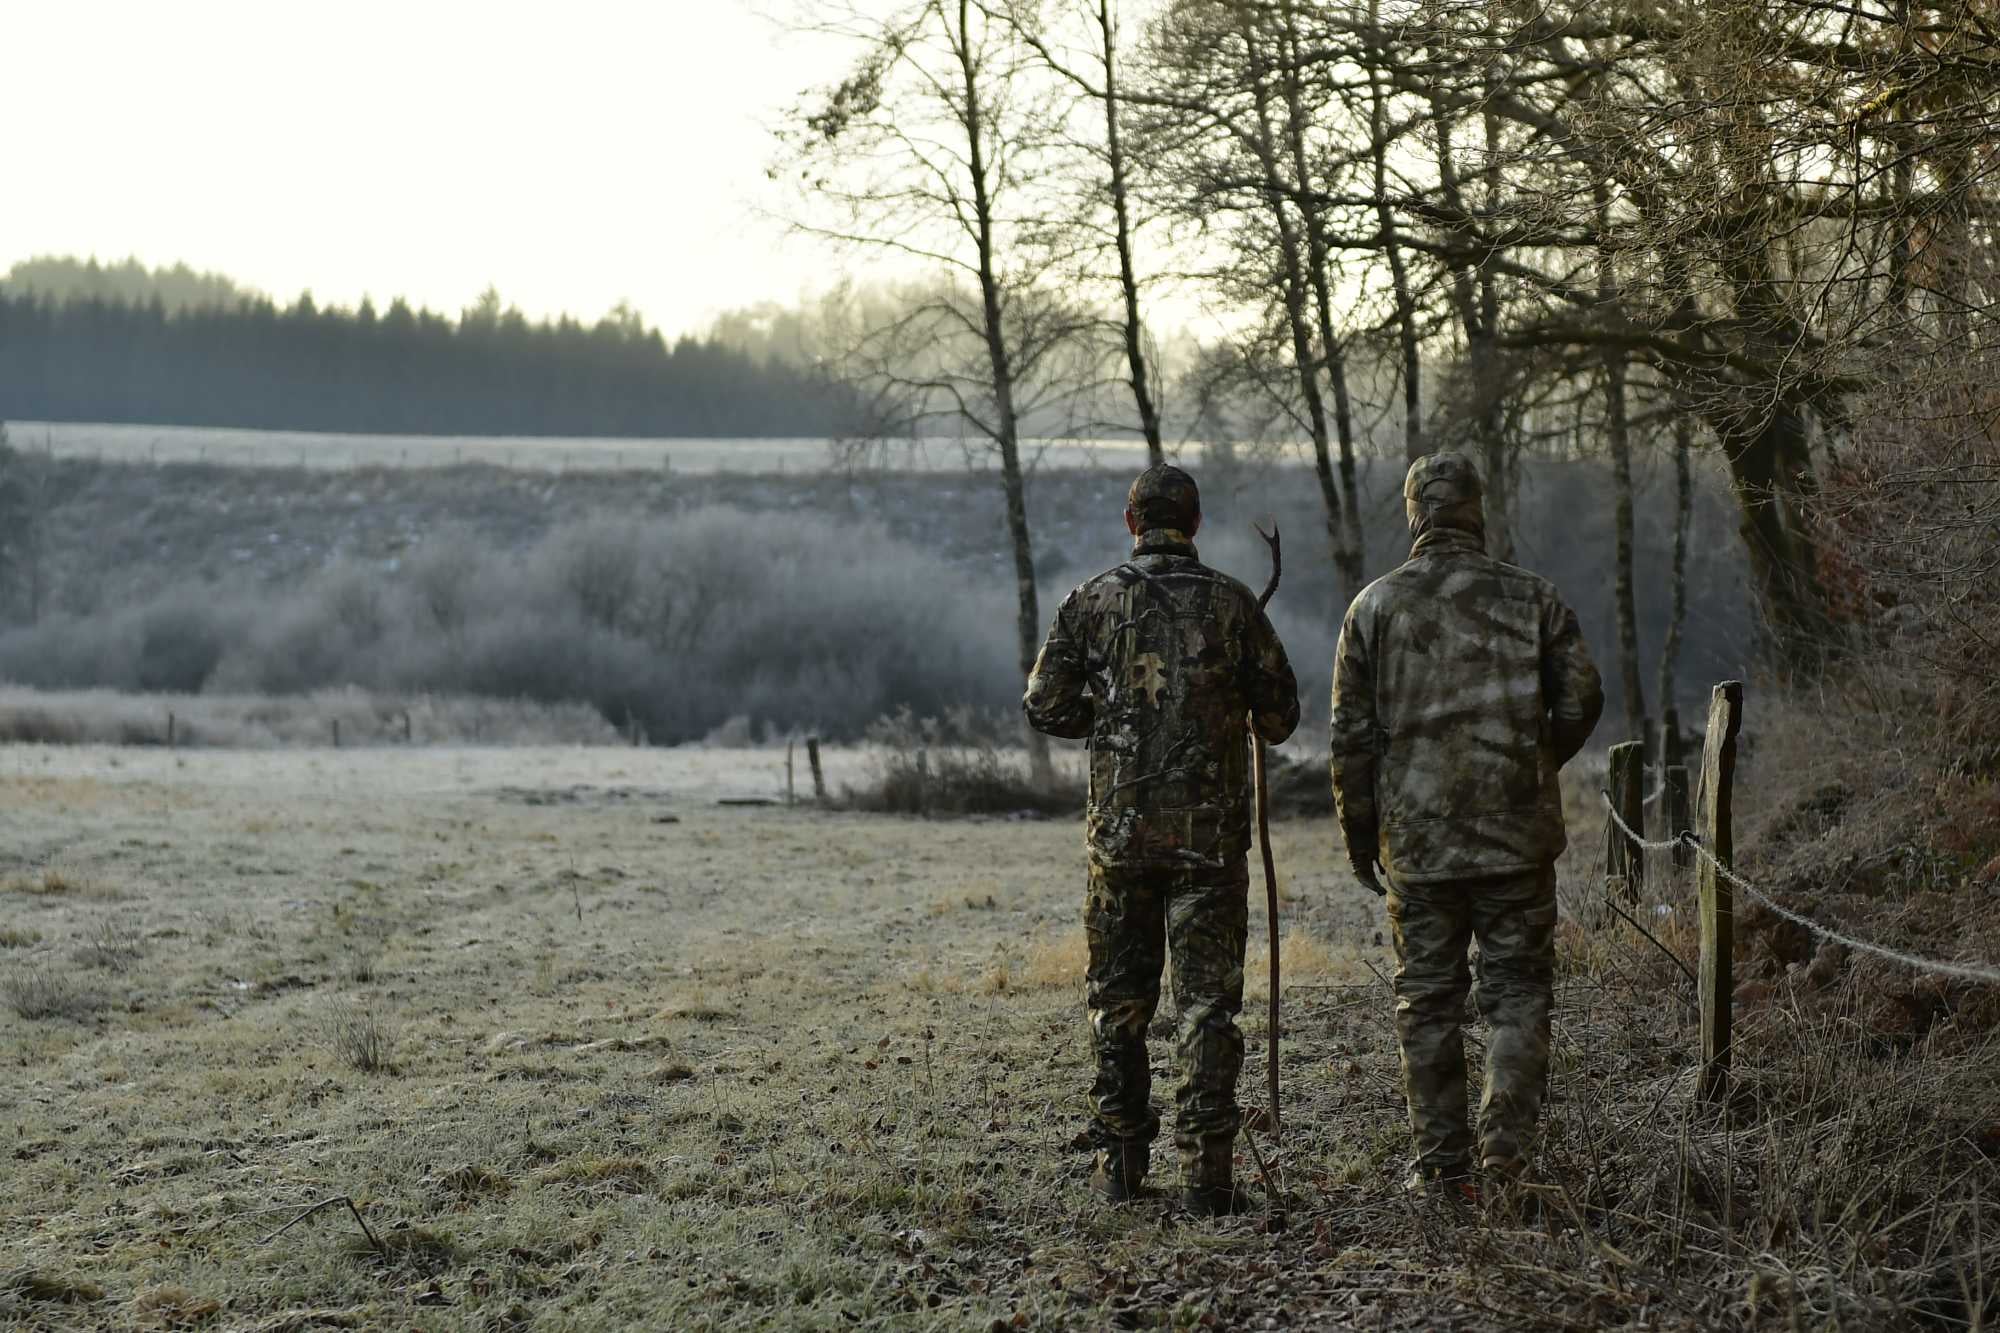 The top 10 excuses for going hunting